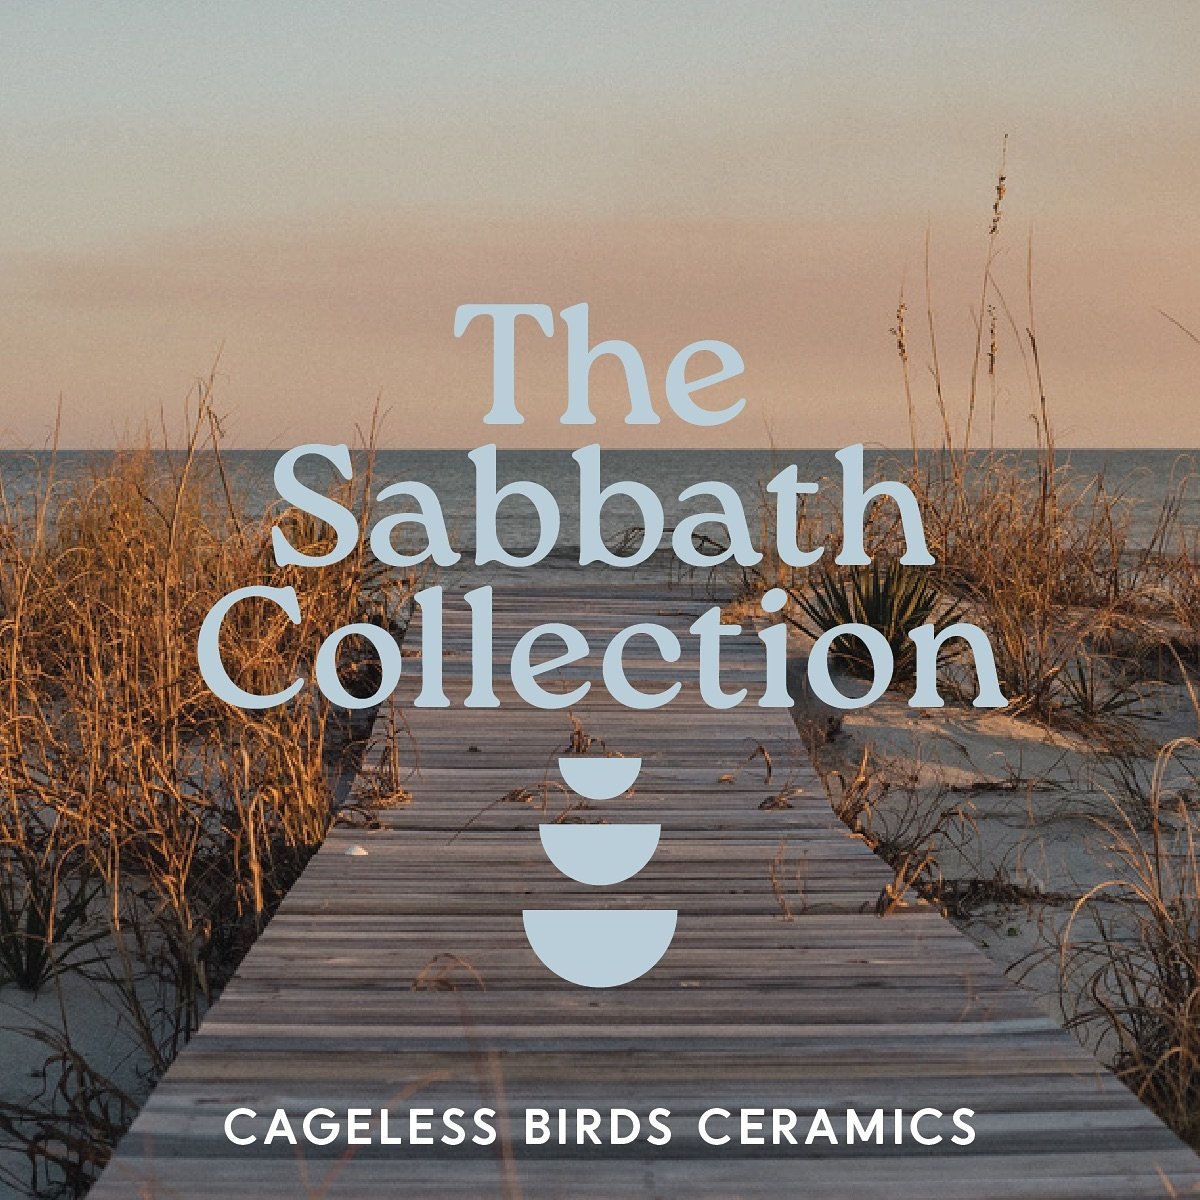 PART 2 of our Sabbath Collection is here! 🌾 Our potters created another collection of one-of-a-kind ceramic vessels, specifically made to be used and savored on the Sabbath&mdash;God&rsquo;s holy day of rest. 

Our hope is that as you pull these ite